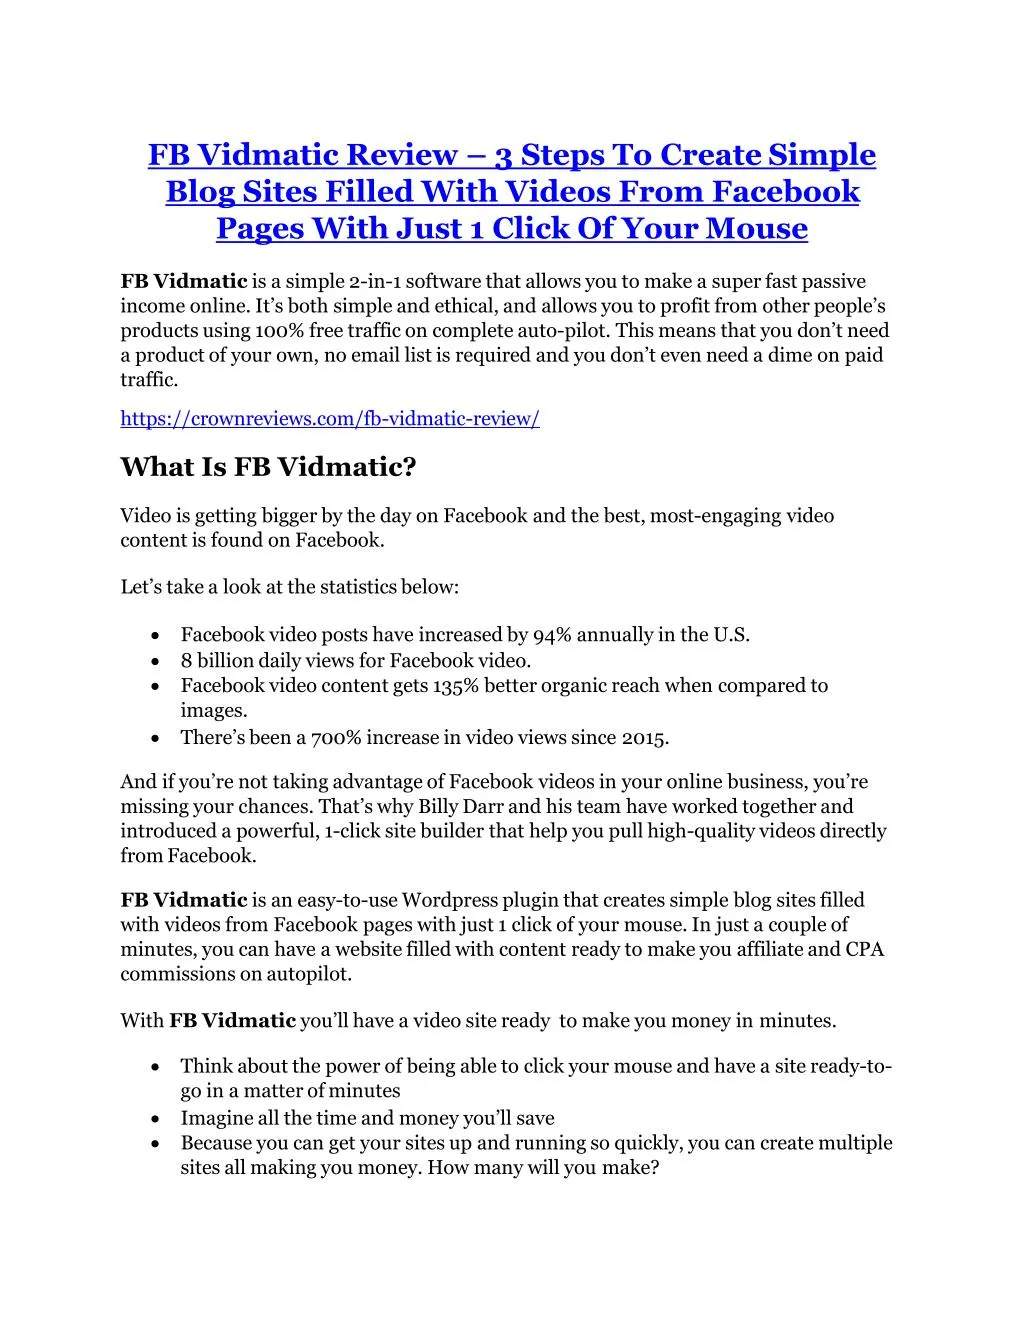 fb vidmatic review 3 steps to create simple blog